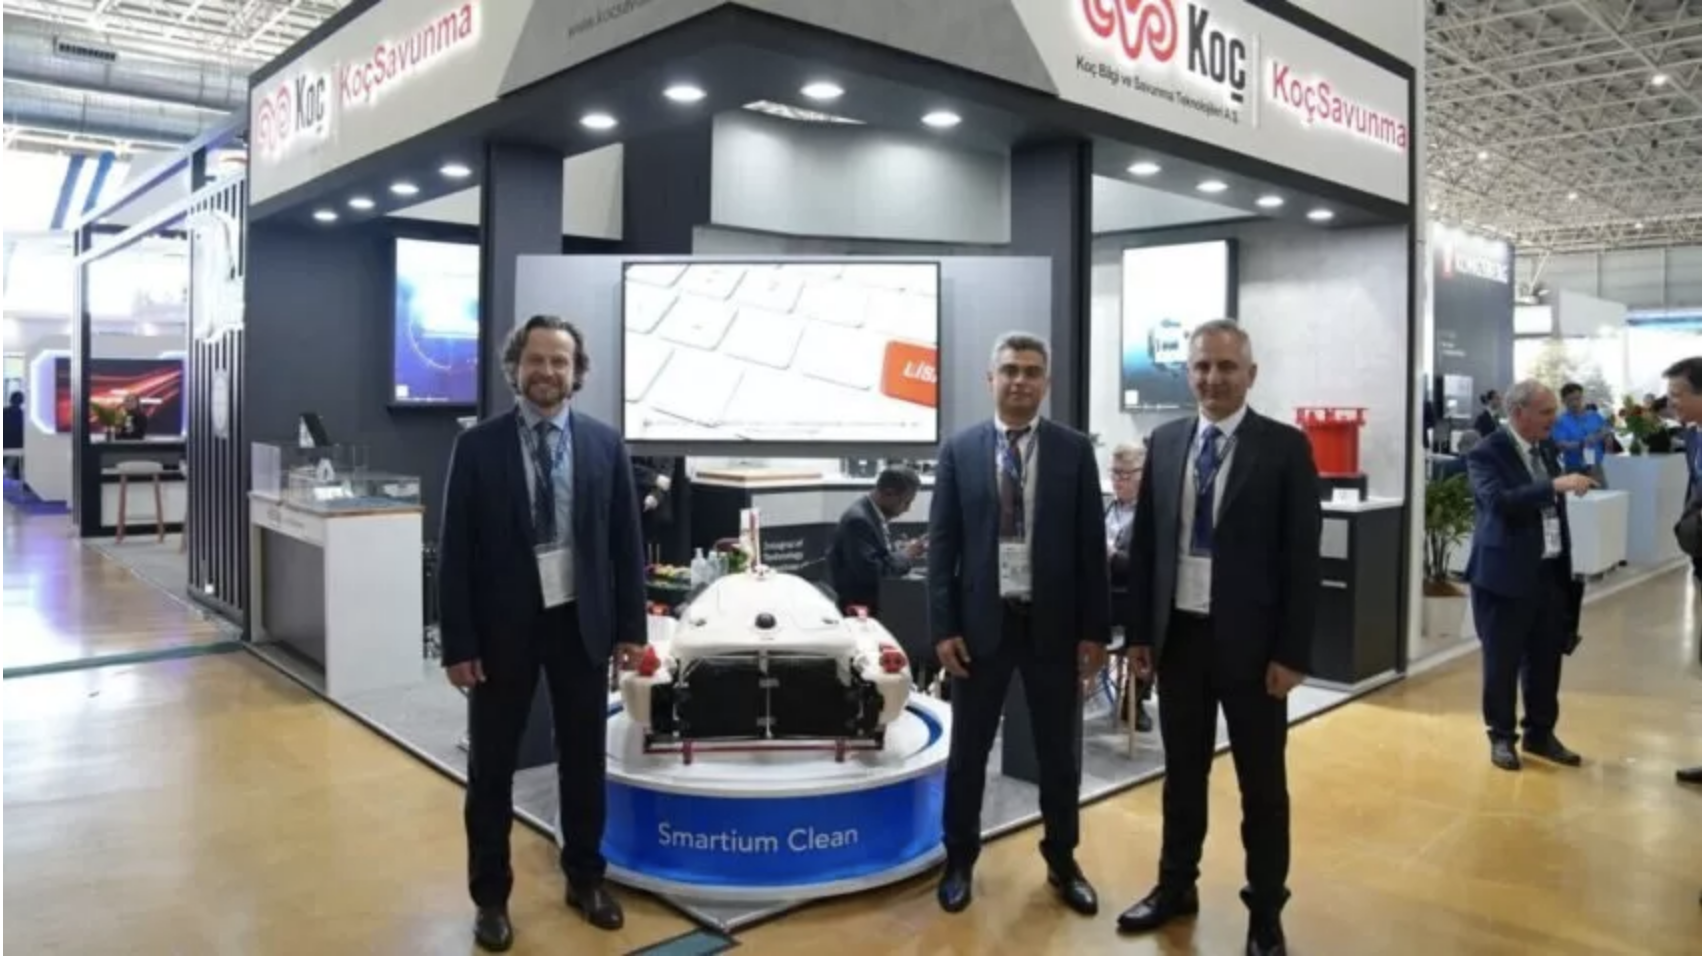 KoçSavunma exhibits its solutions on underwater systems including the acoustic systems at LIMA in Malaysia